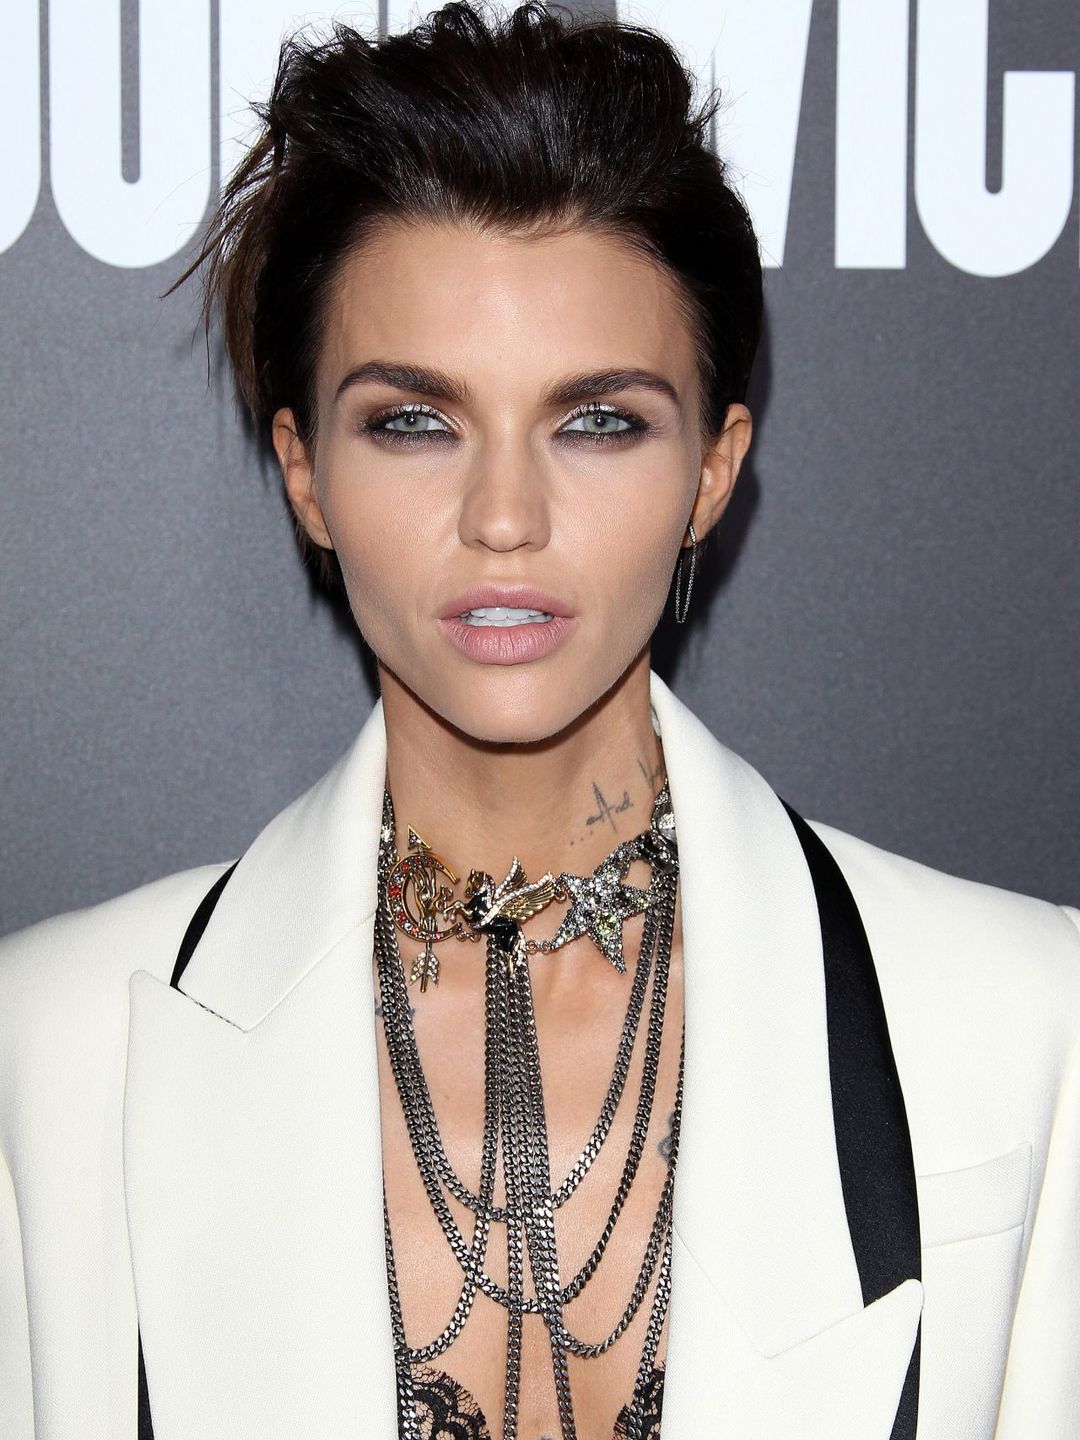 Ruby Rose who is she